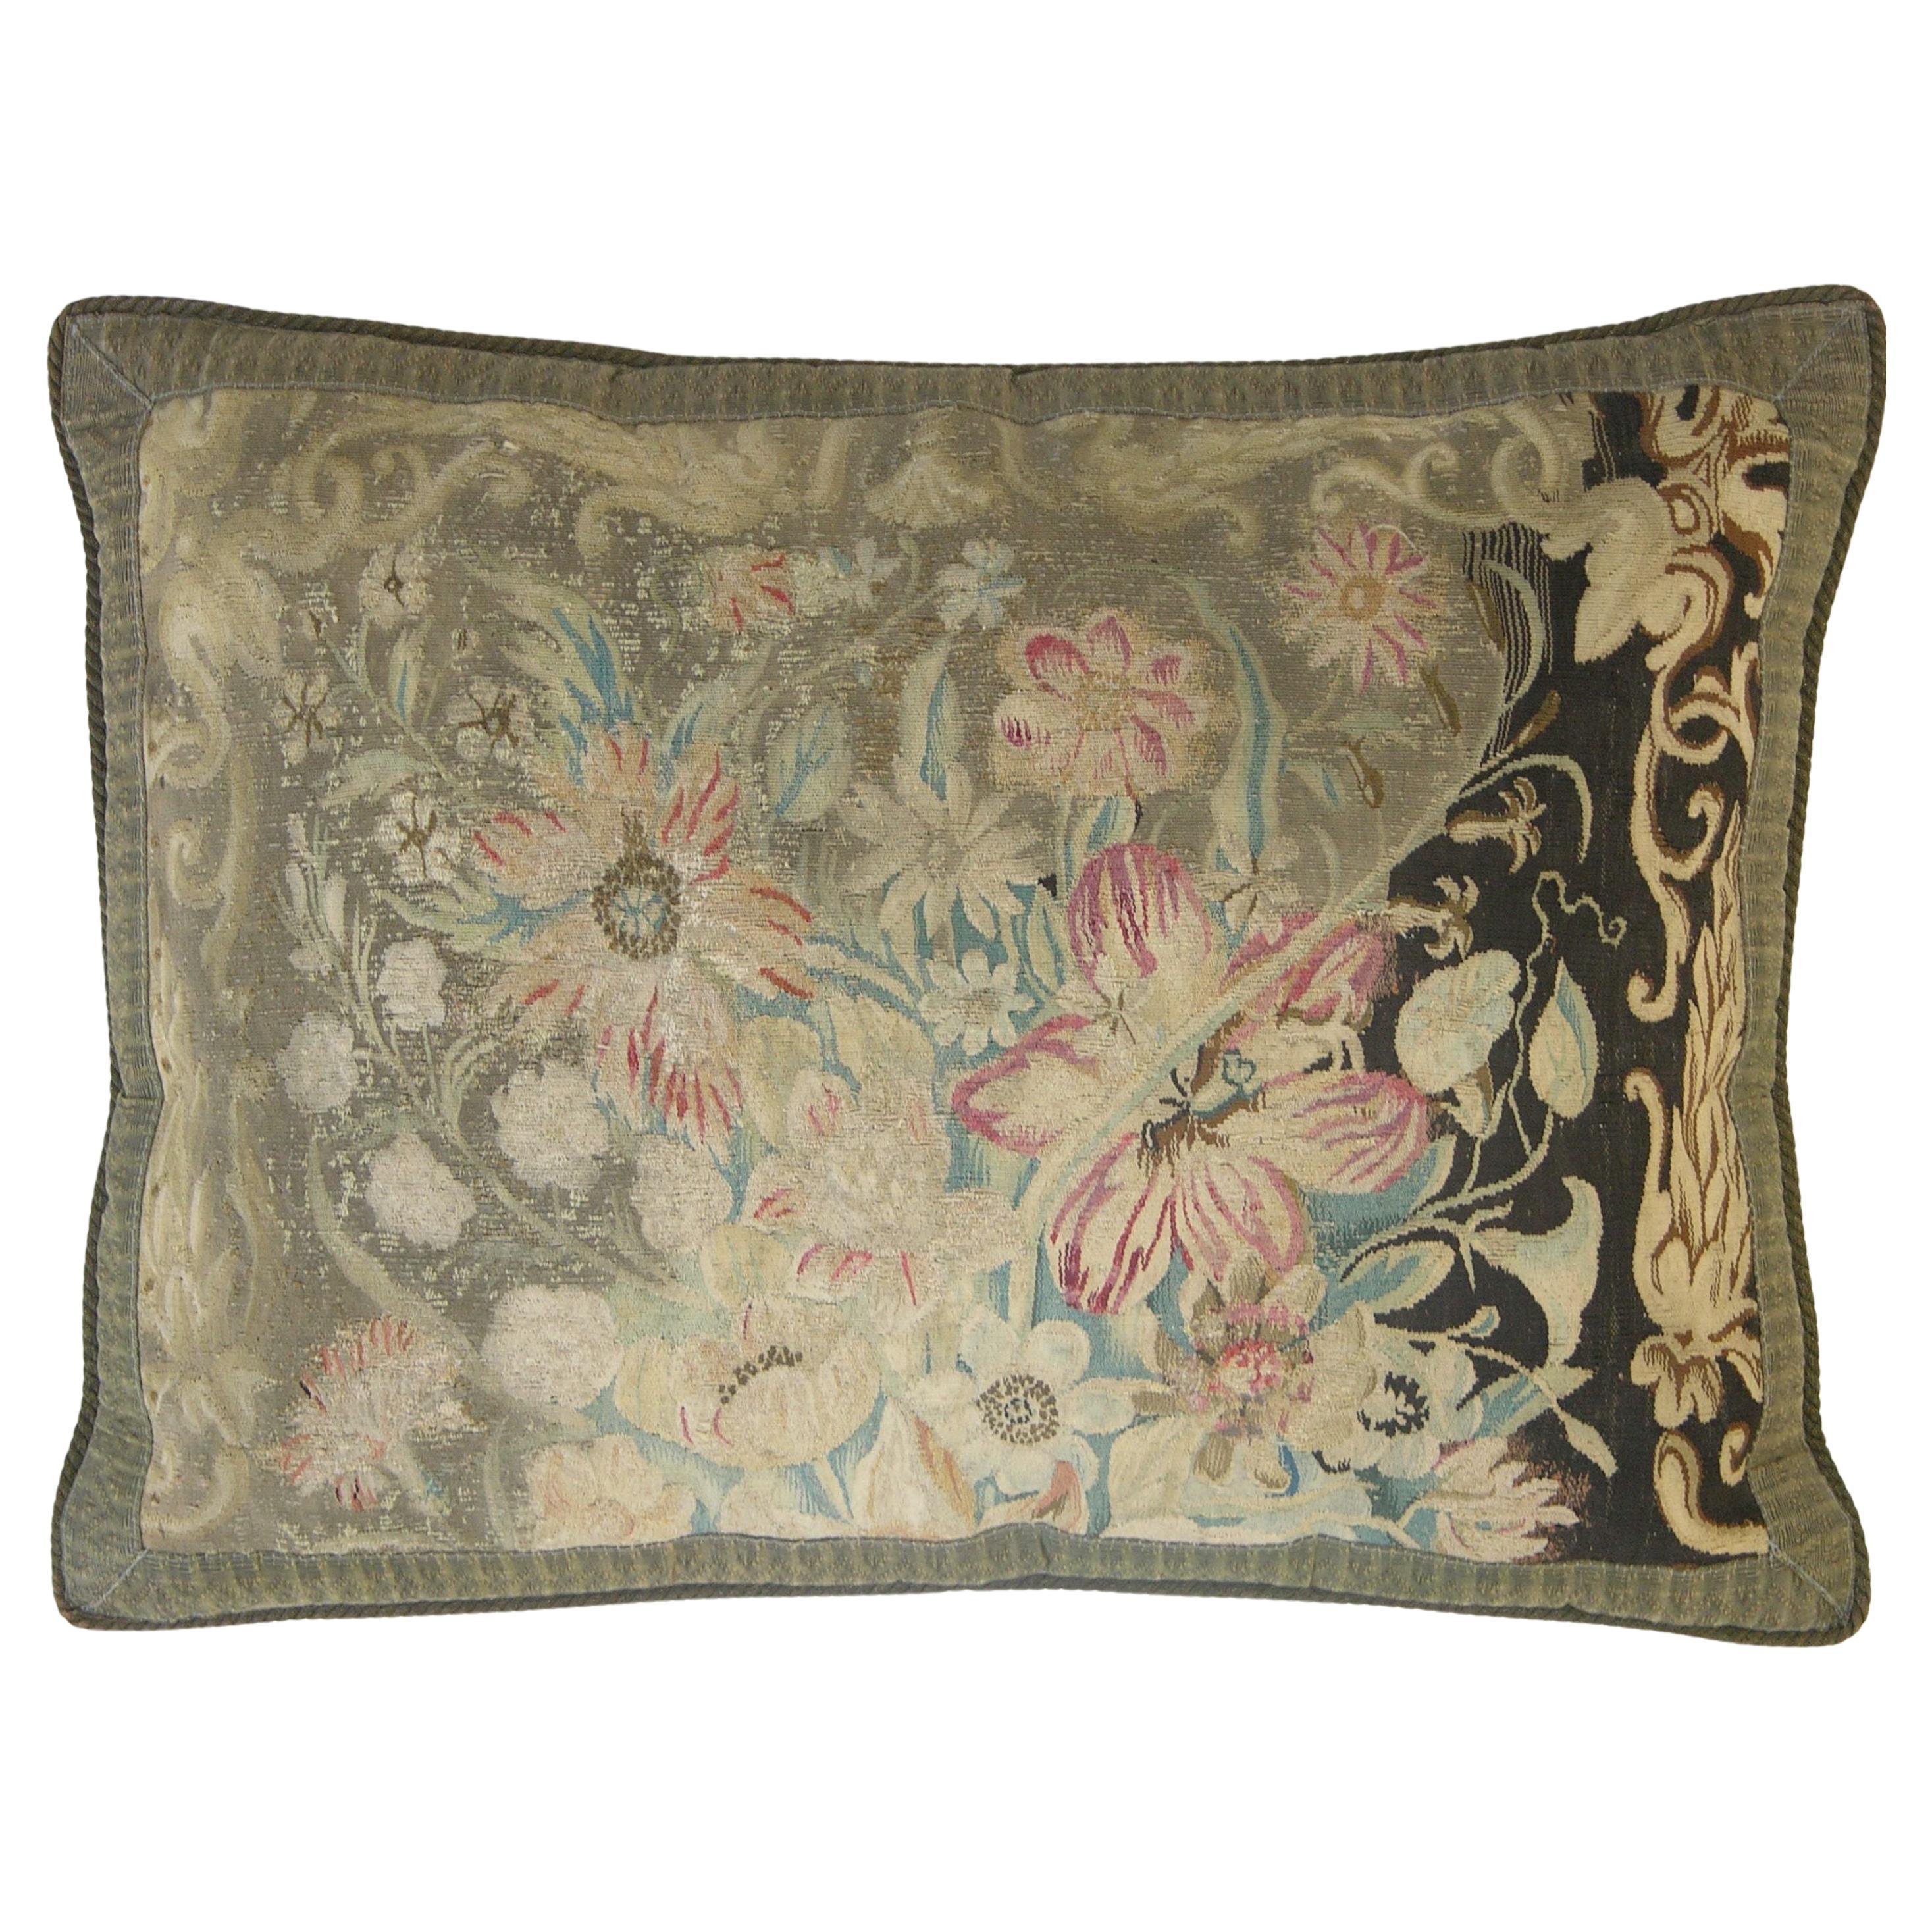 Early 18th Century Antique French Aubusson Tapestry Pillow For Sale